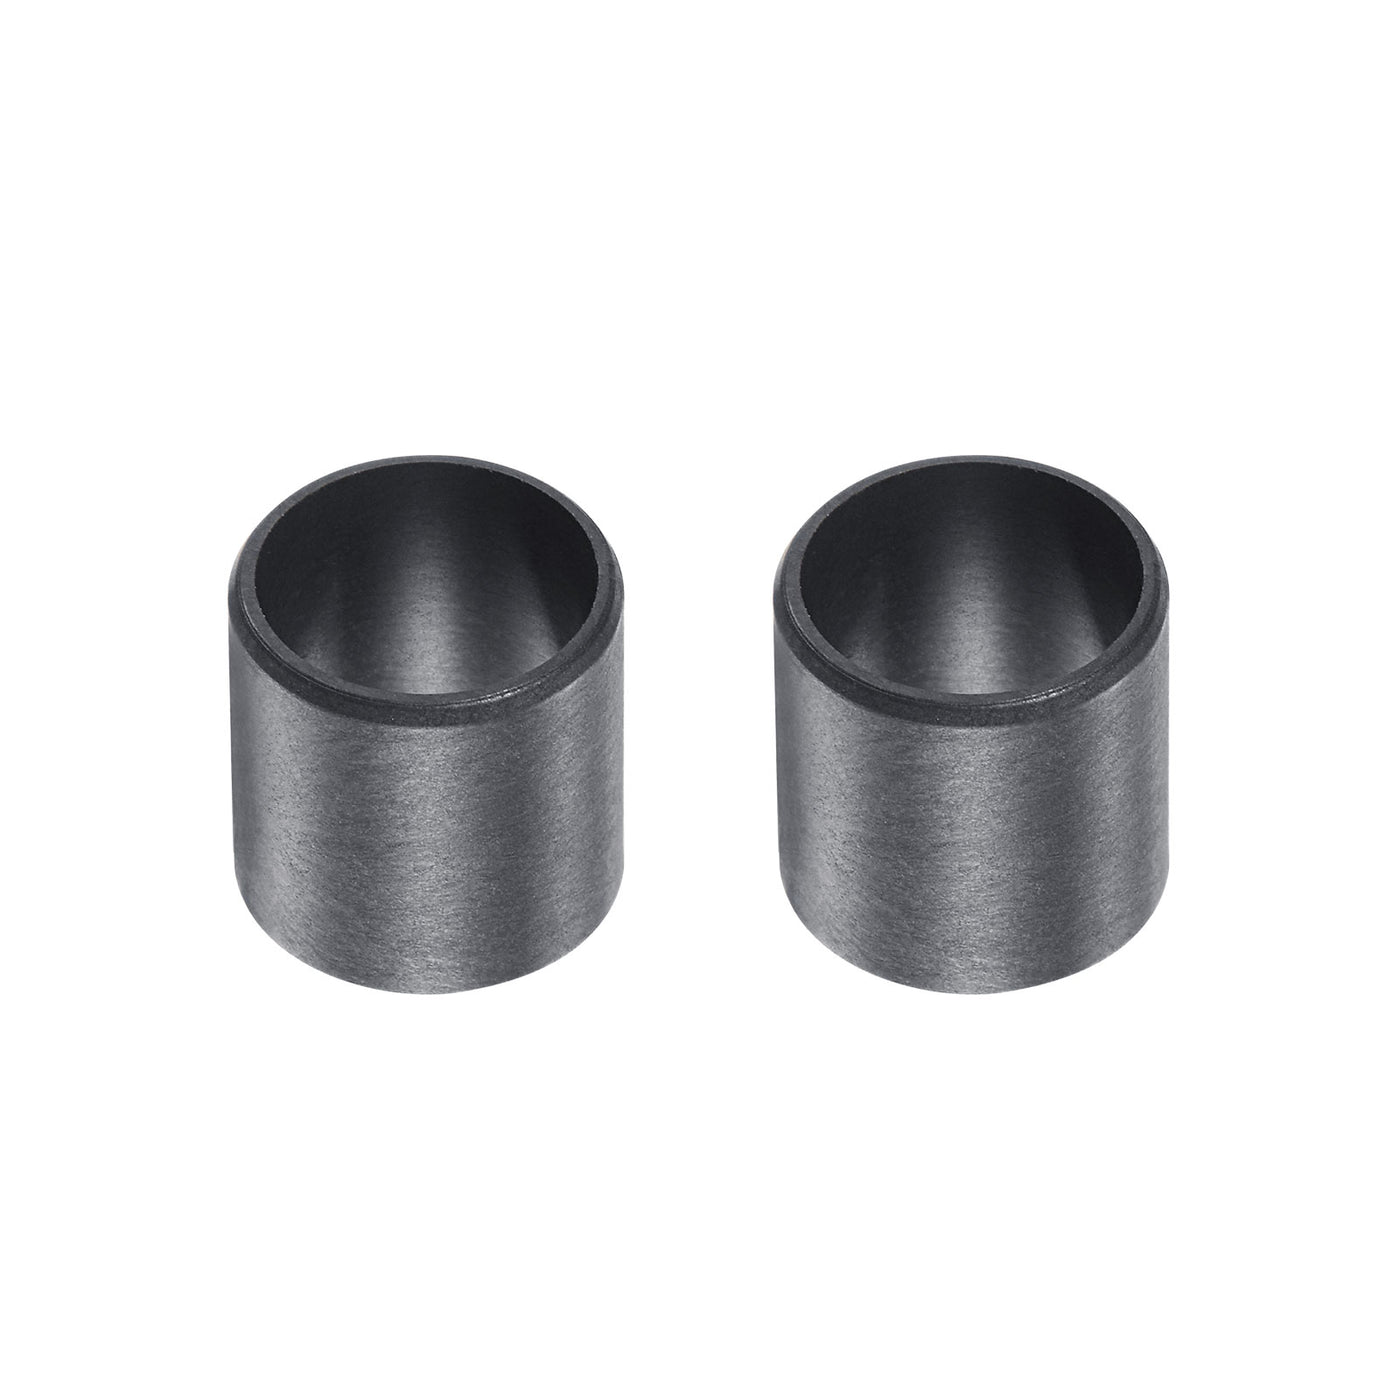 uxcell Uxcell Sleeve Bearings 12mmx14mmx12mm POM Wrapped Oilless Bushings Black 2pcs